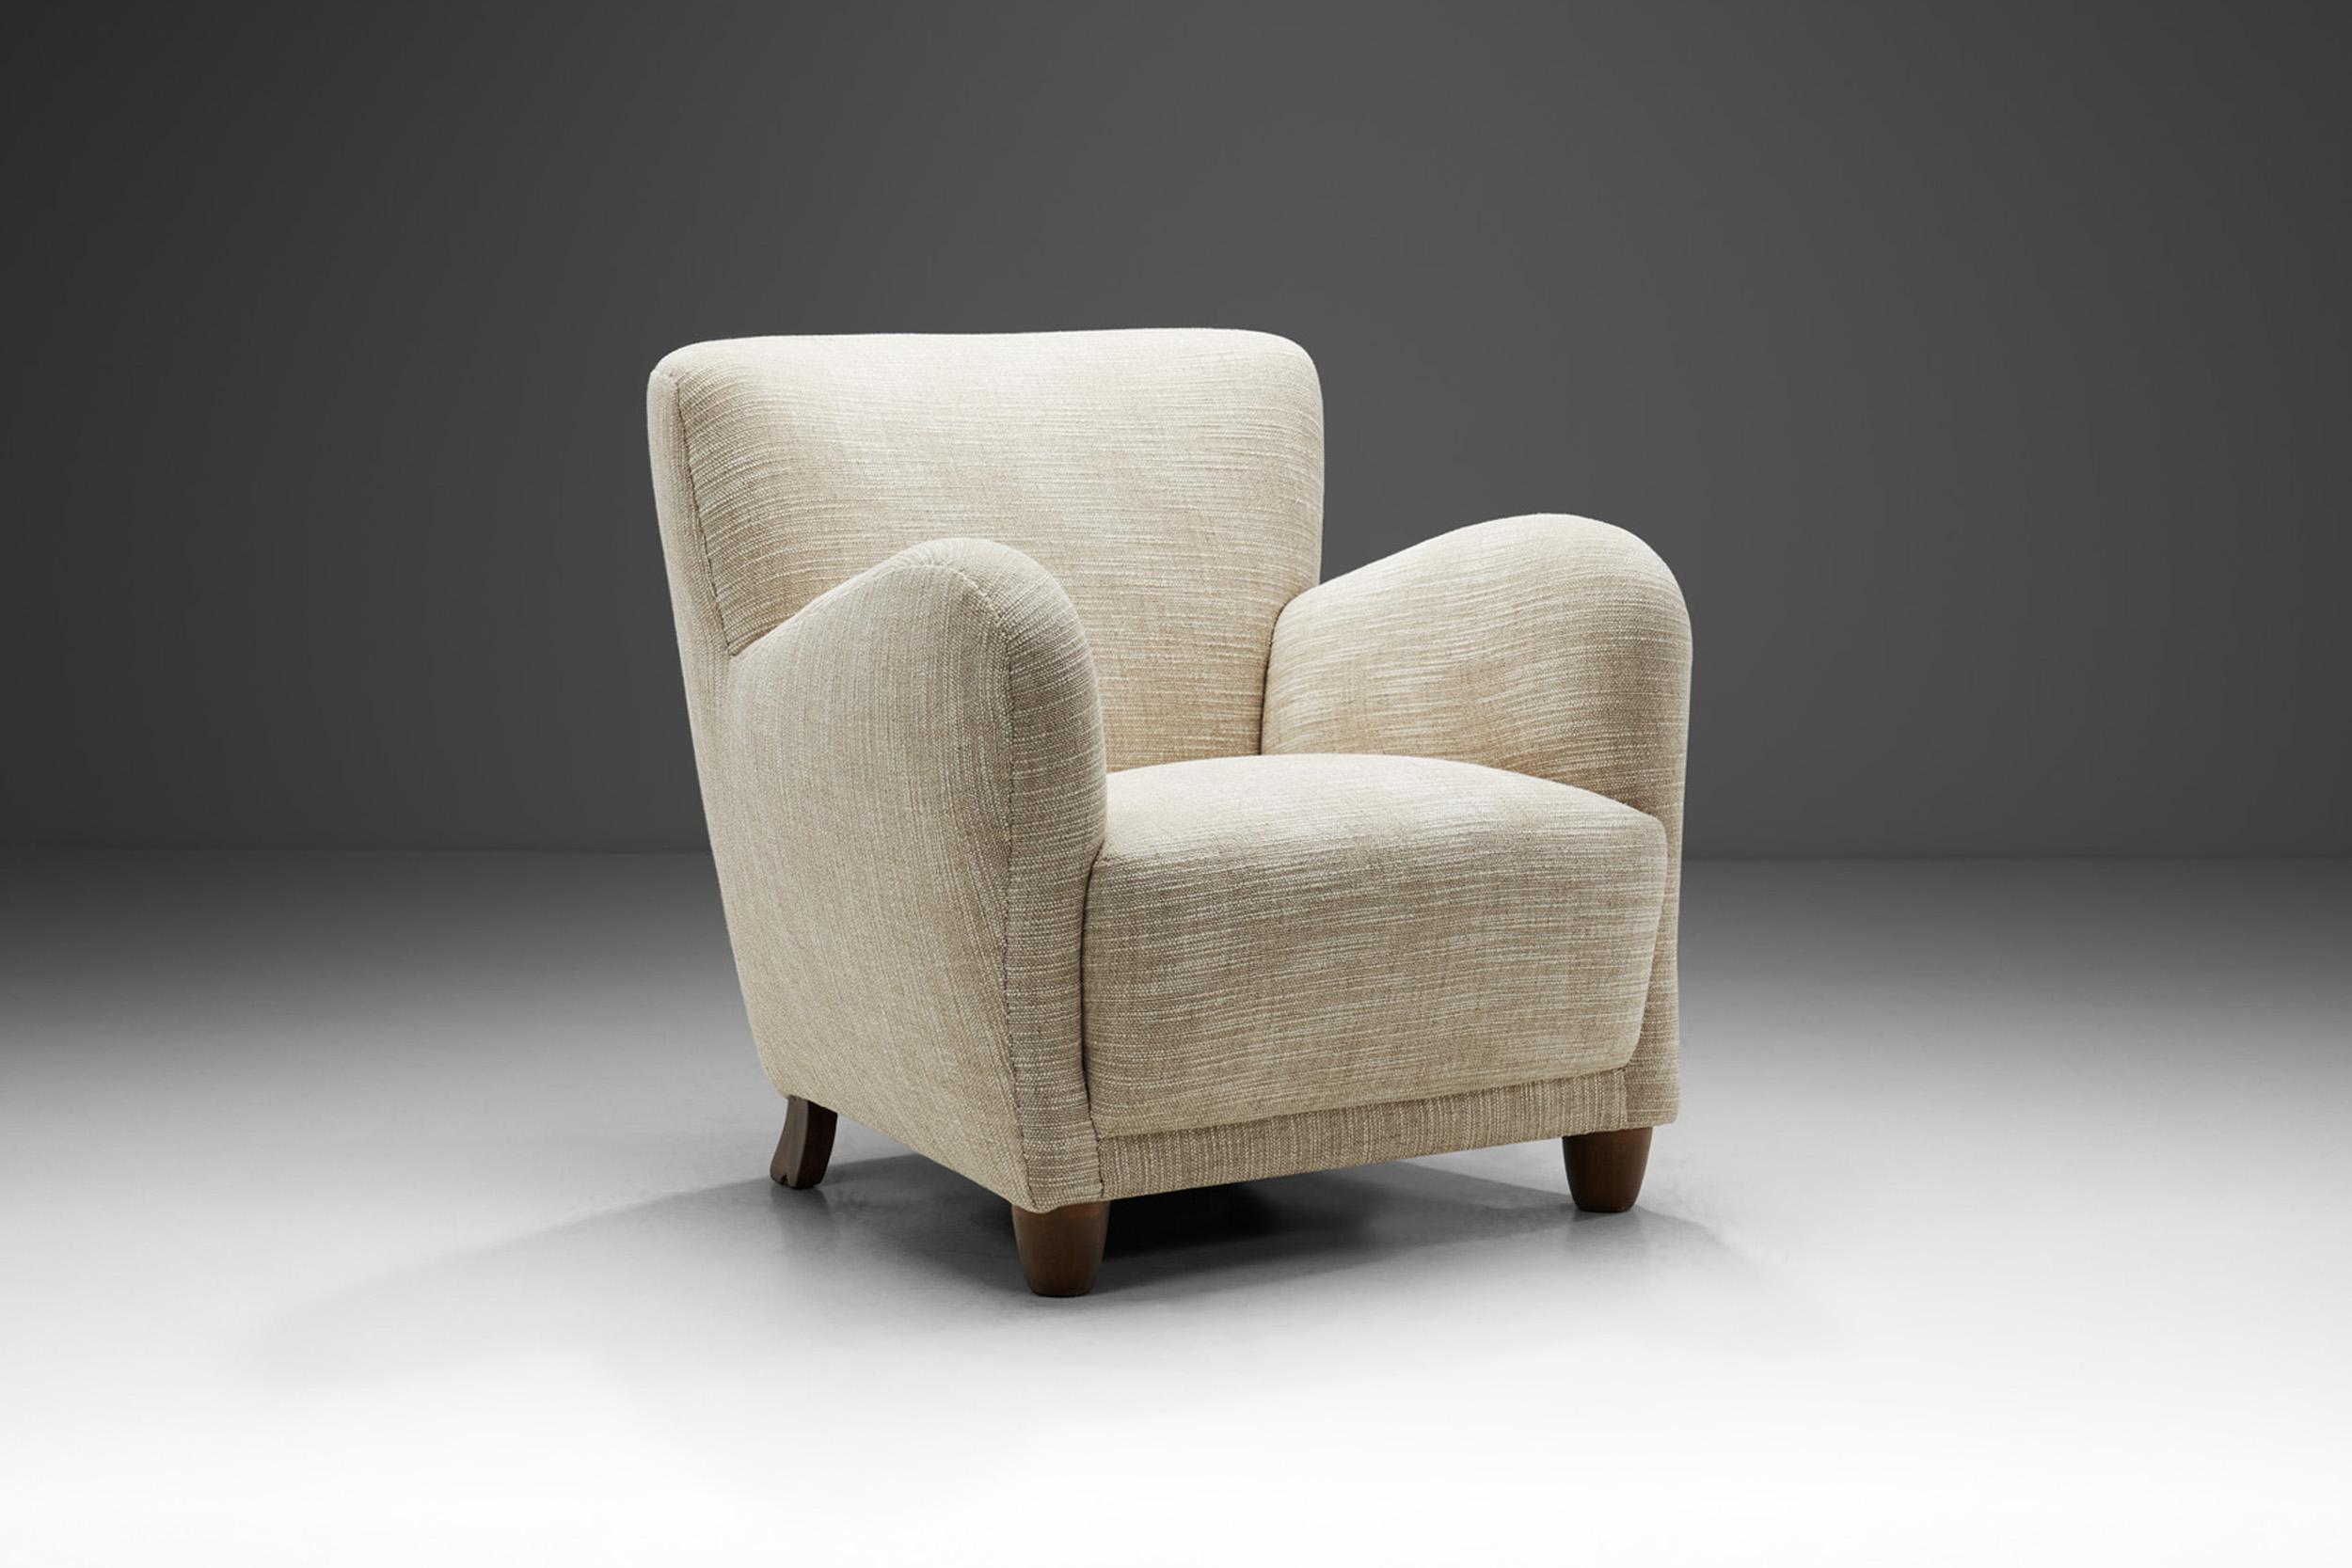 This early Danish mid-century armchair is a great example of the unification of comfort and delicate design elements. The touch of Danish Modernism is recognizable in the exquisite materials, the craftsmanship, and in the elegantly curved and